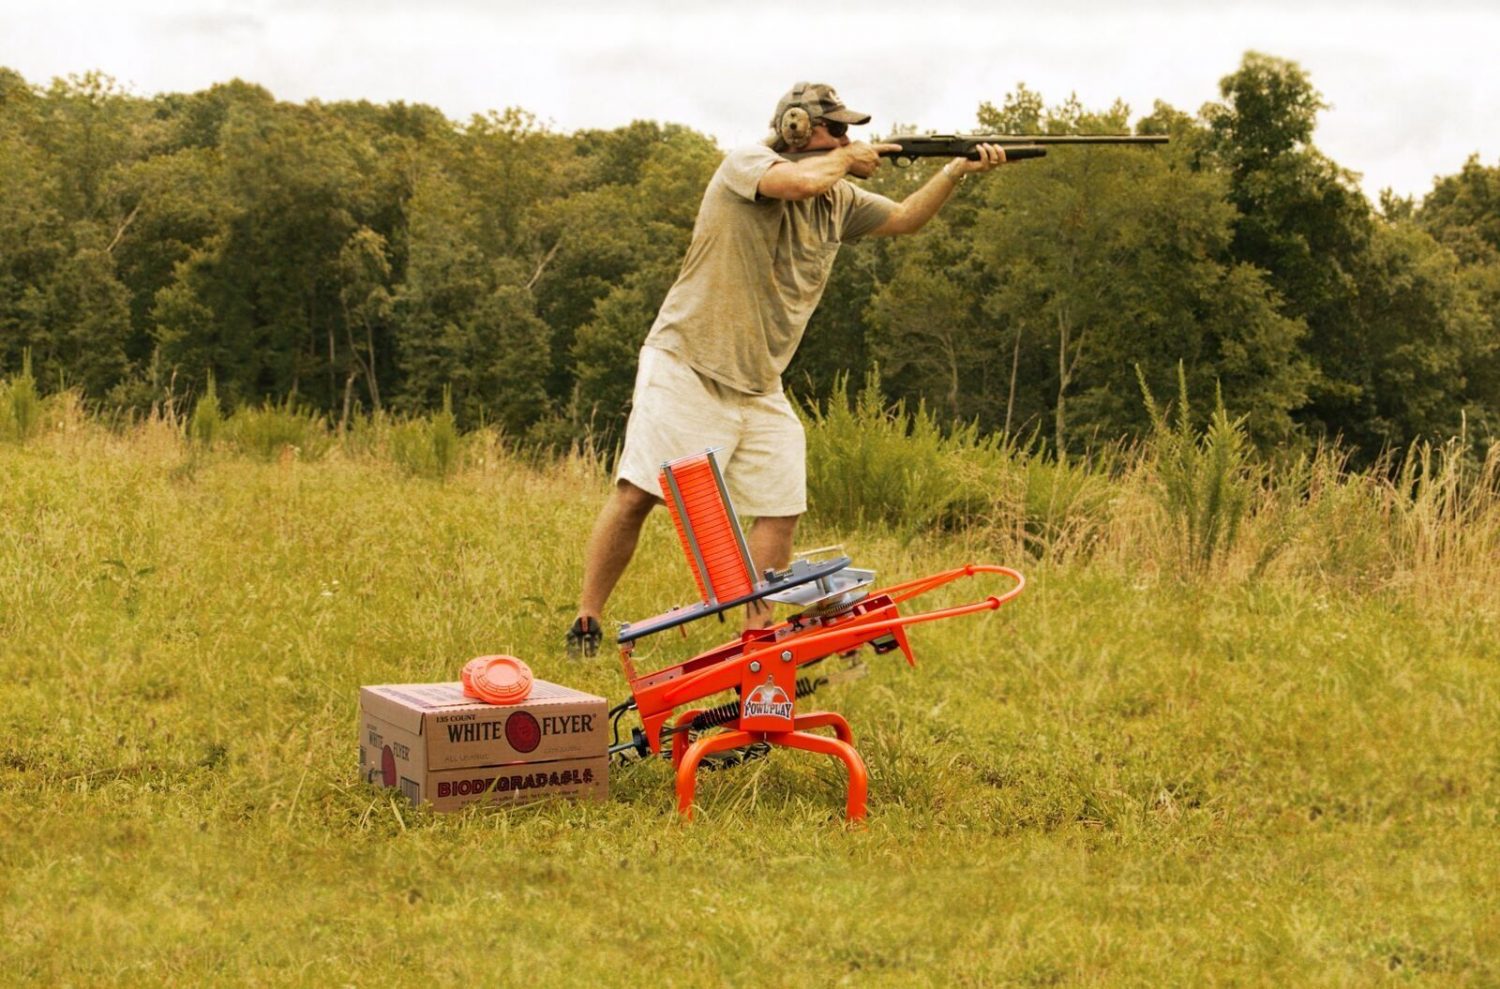 Manual Clay Pigeon thrower vs electric clay pigeon thrower